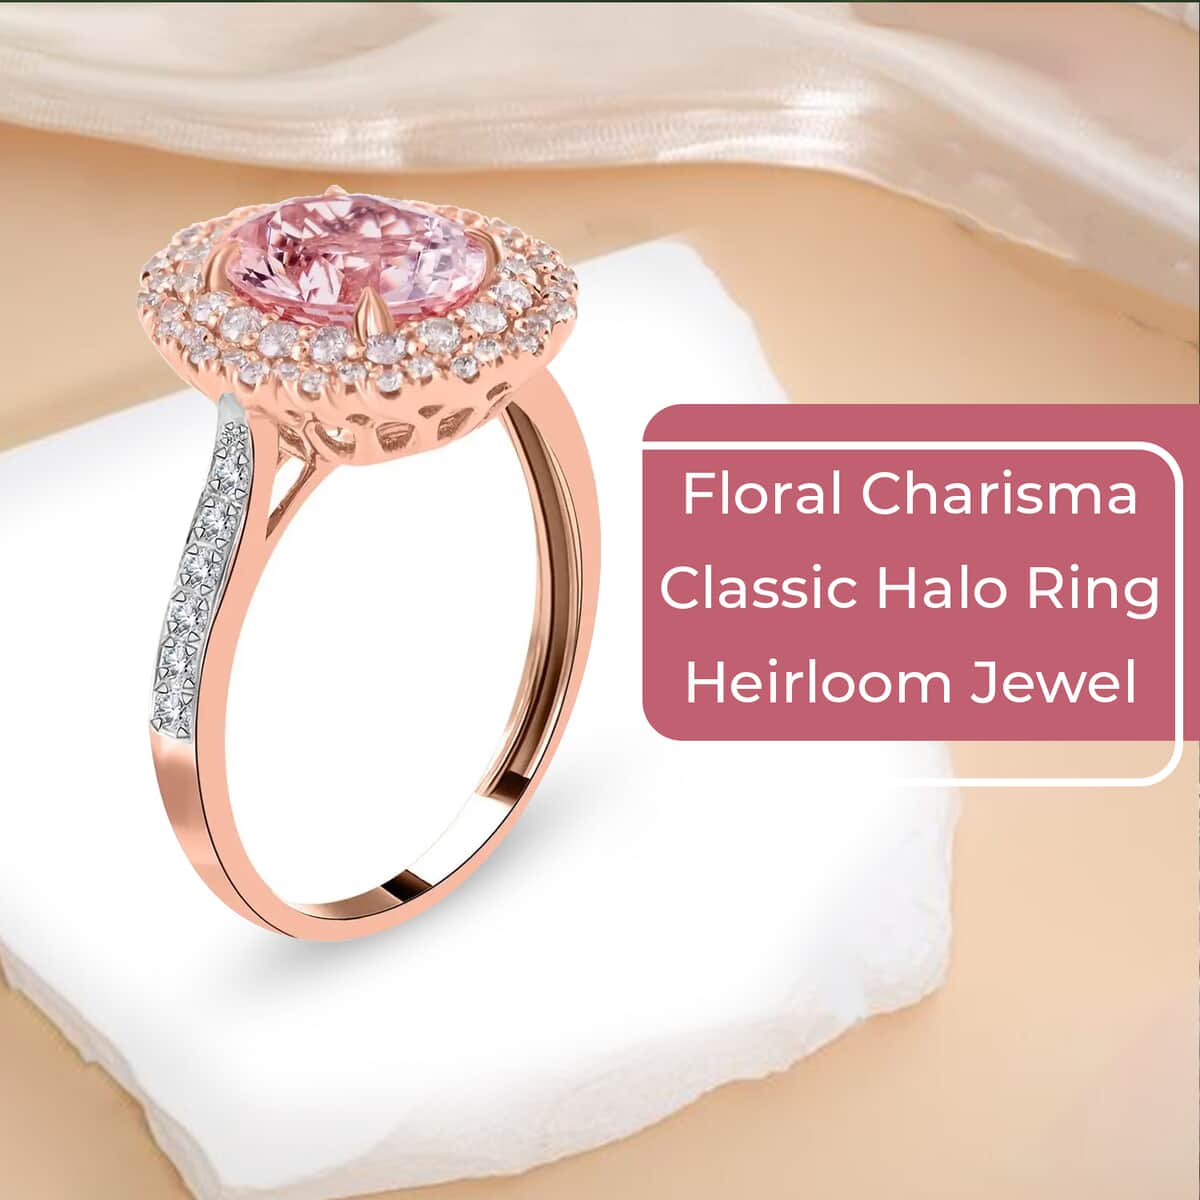 Ankur Treasure Chest Modani Marropino Morganite Ring, 14K Rose Gold Ring, Diamond Floral Halo Ring, Natural Pink And White Diamond Accent Ring, Promise Rings 1.95 ctw (Size 7.0) image number 3